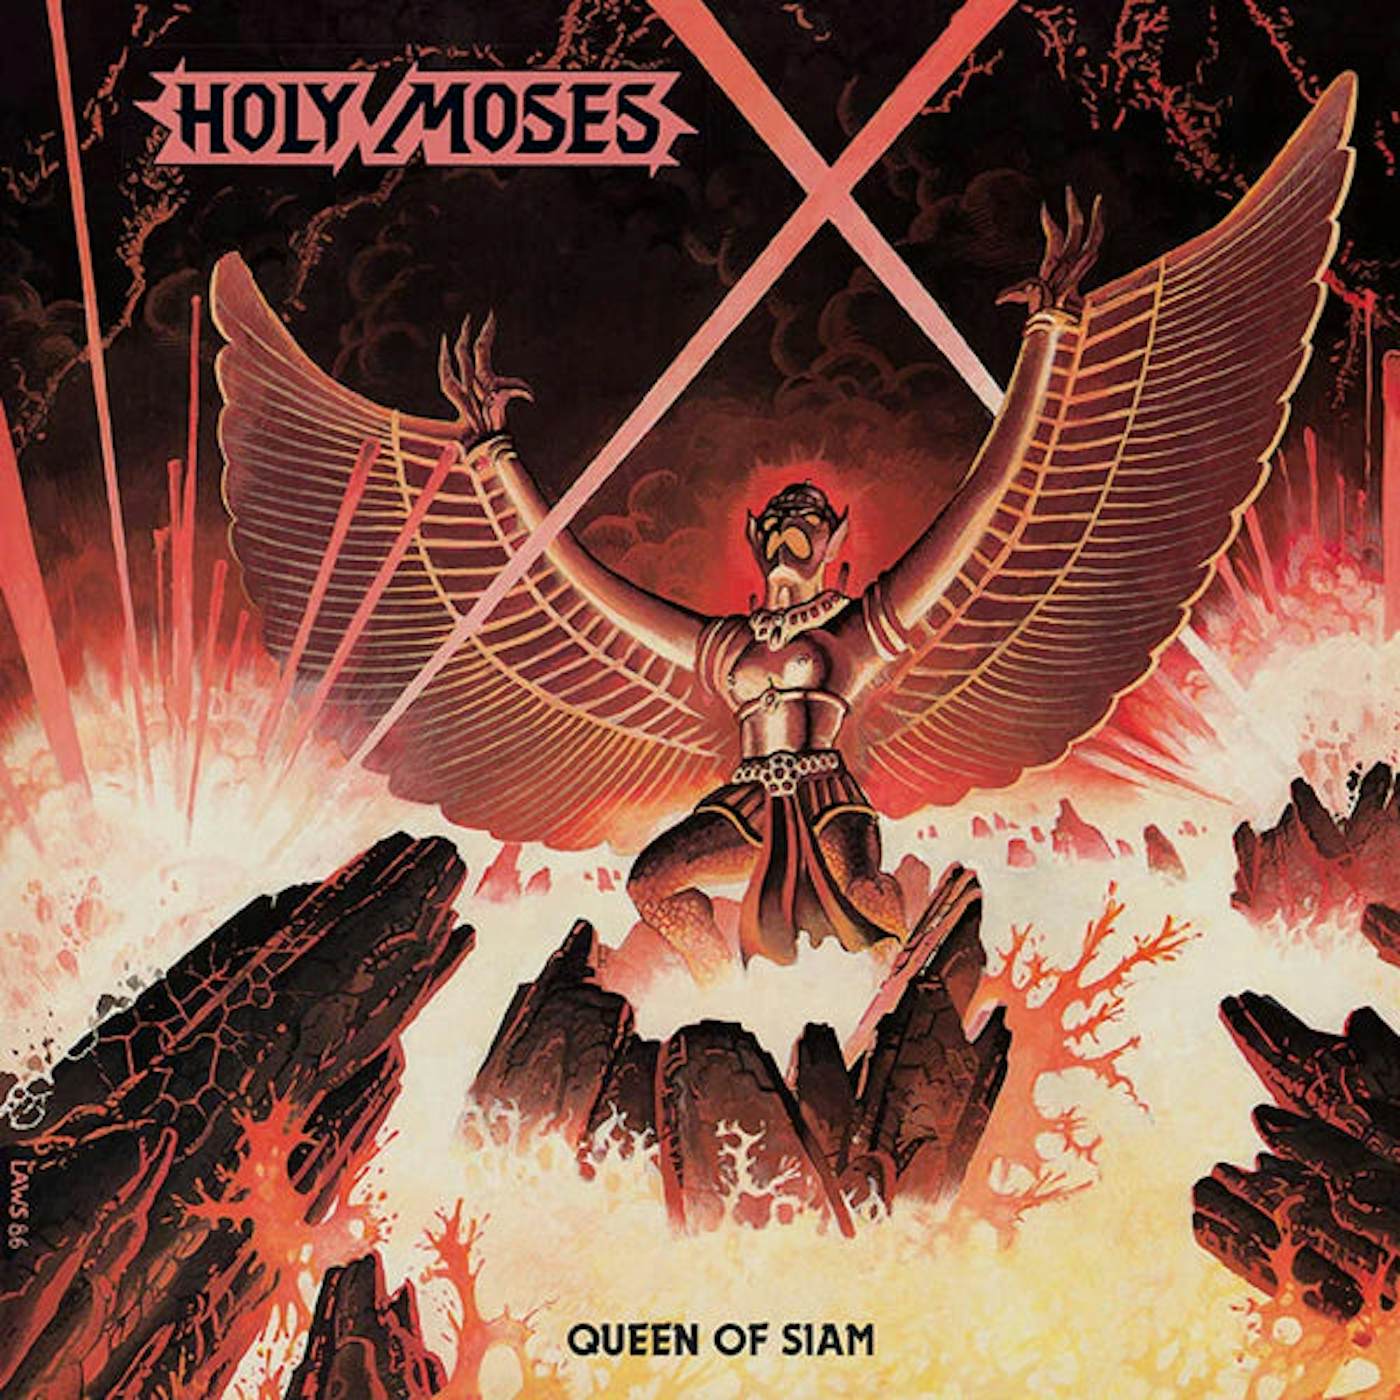 Holy Moses LP - Queen Of Siam (Mixed Vinyl)